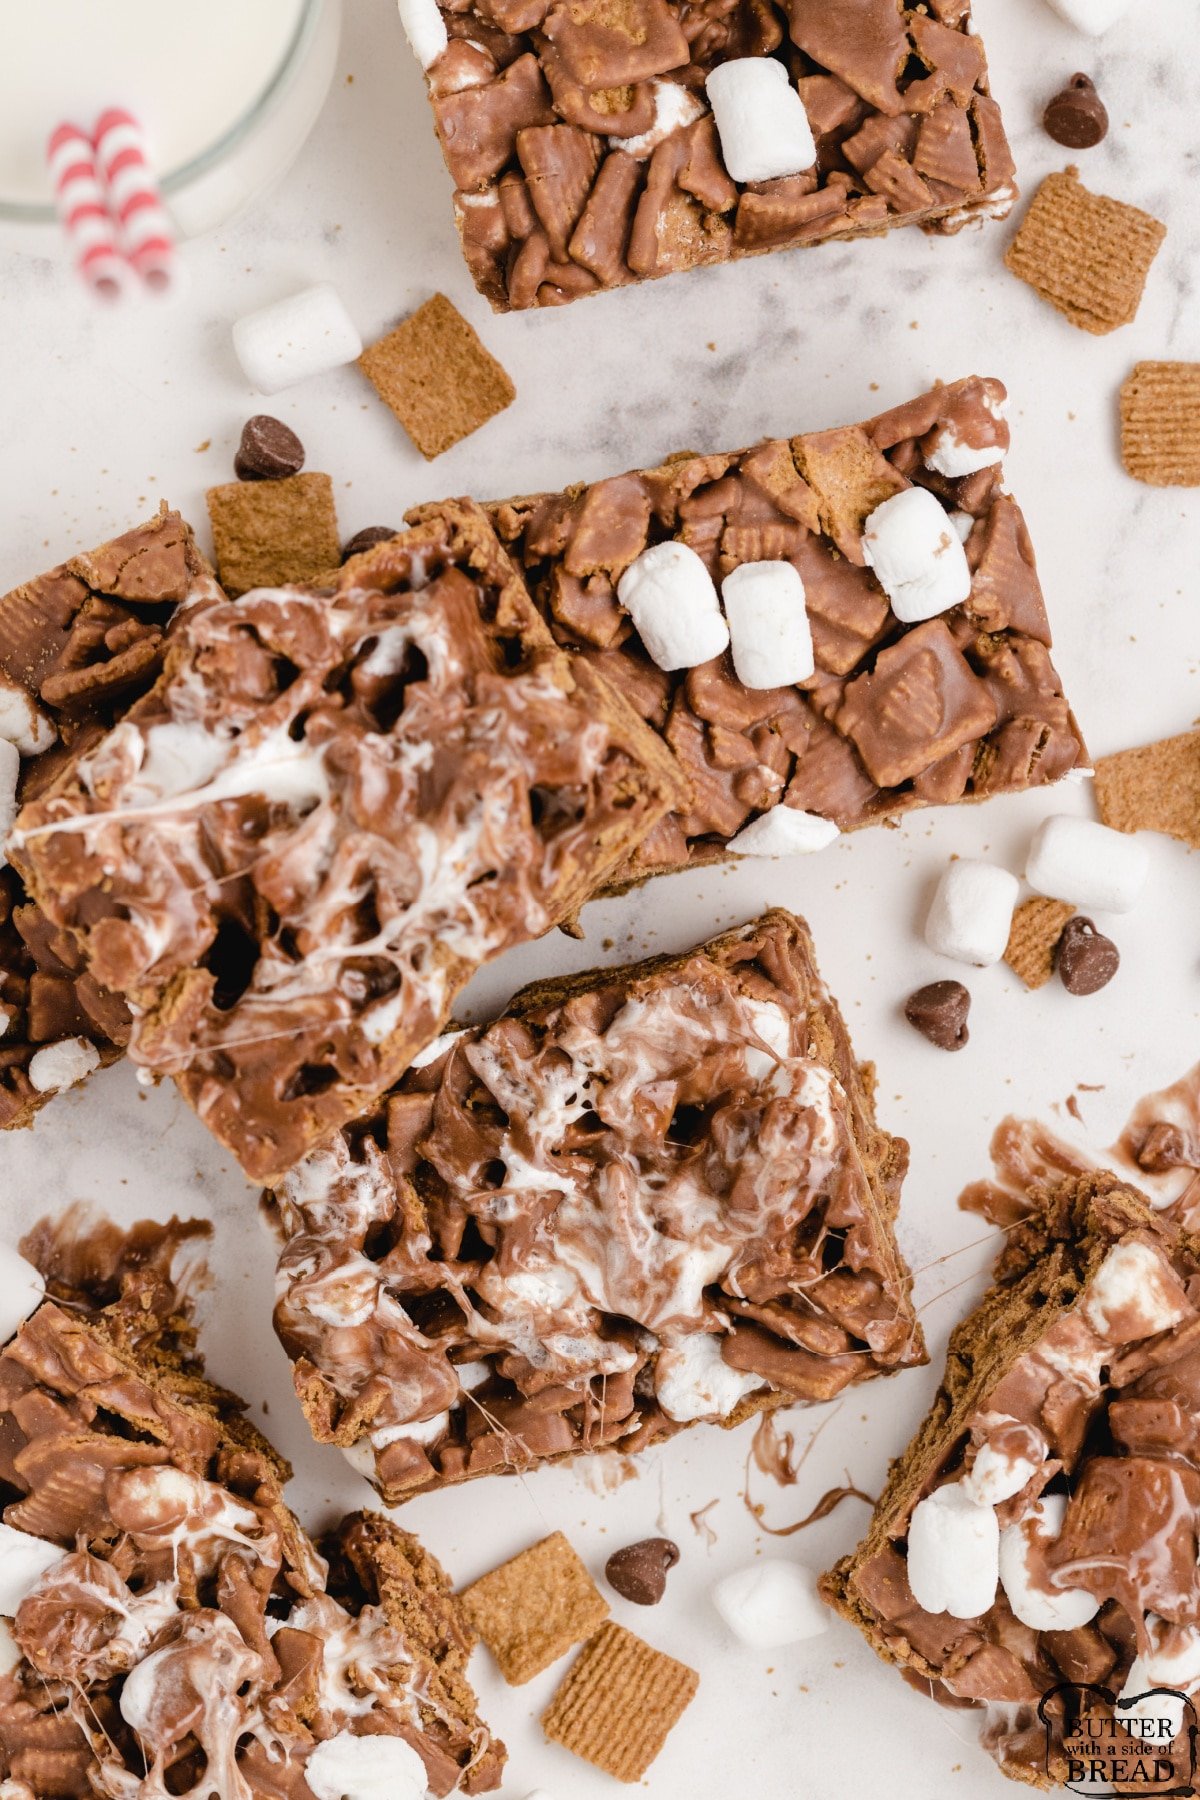 No Bake S'mores Bars made with chocolate, marshmallows and Golden Grahams cereal